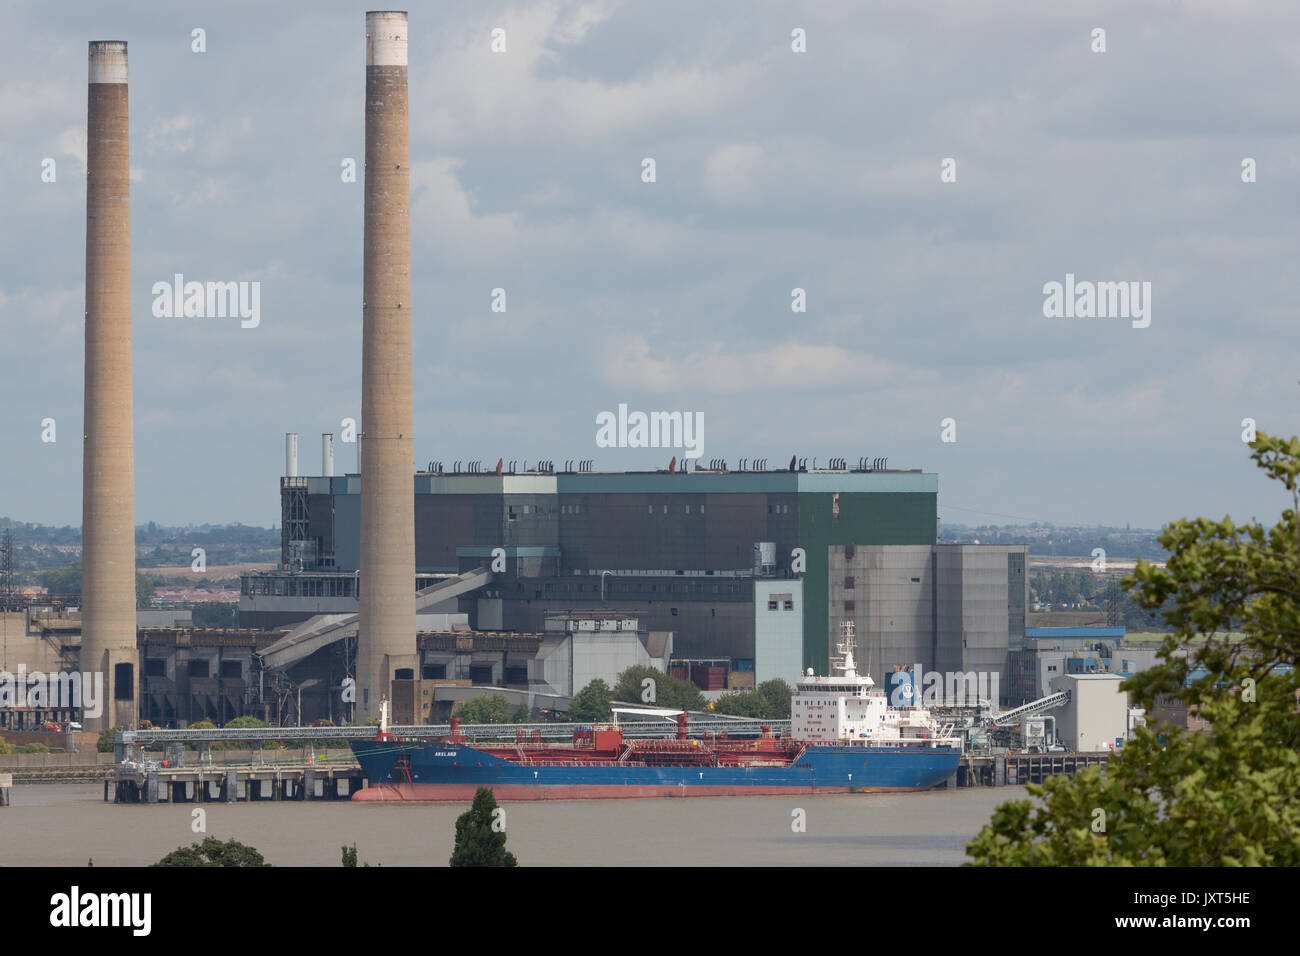 Tilbury, Essex, United Kingdom. 17th August, 2017. Tanker Arsland pictured moored at Tilbury Power Station today to undergo checks after it ran aground in the Thames at Broadness last night. The chemical tanker departed Purfleet bound for Hamburg last night when the incident occured rounding Swanscombe peninsula. Rob Powell/Alamy Live News Stock Photo